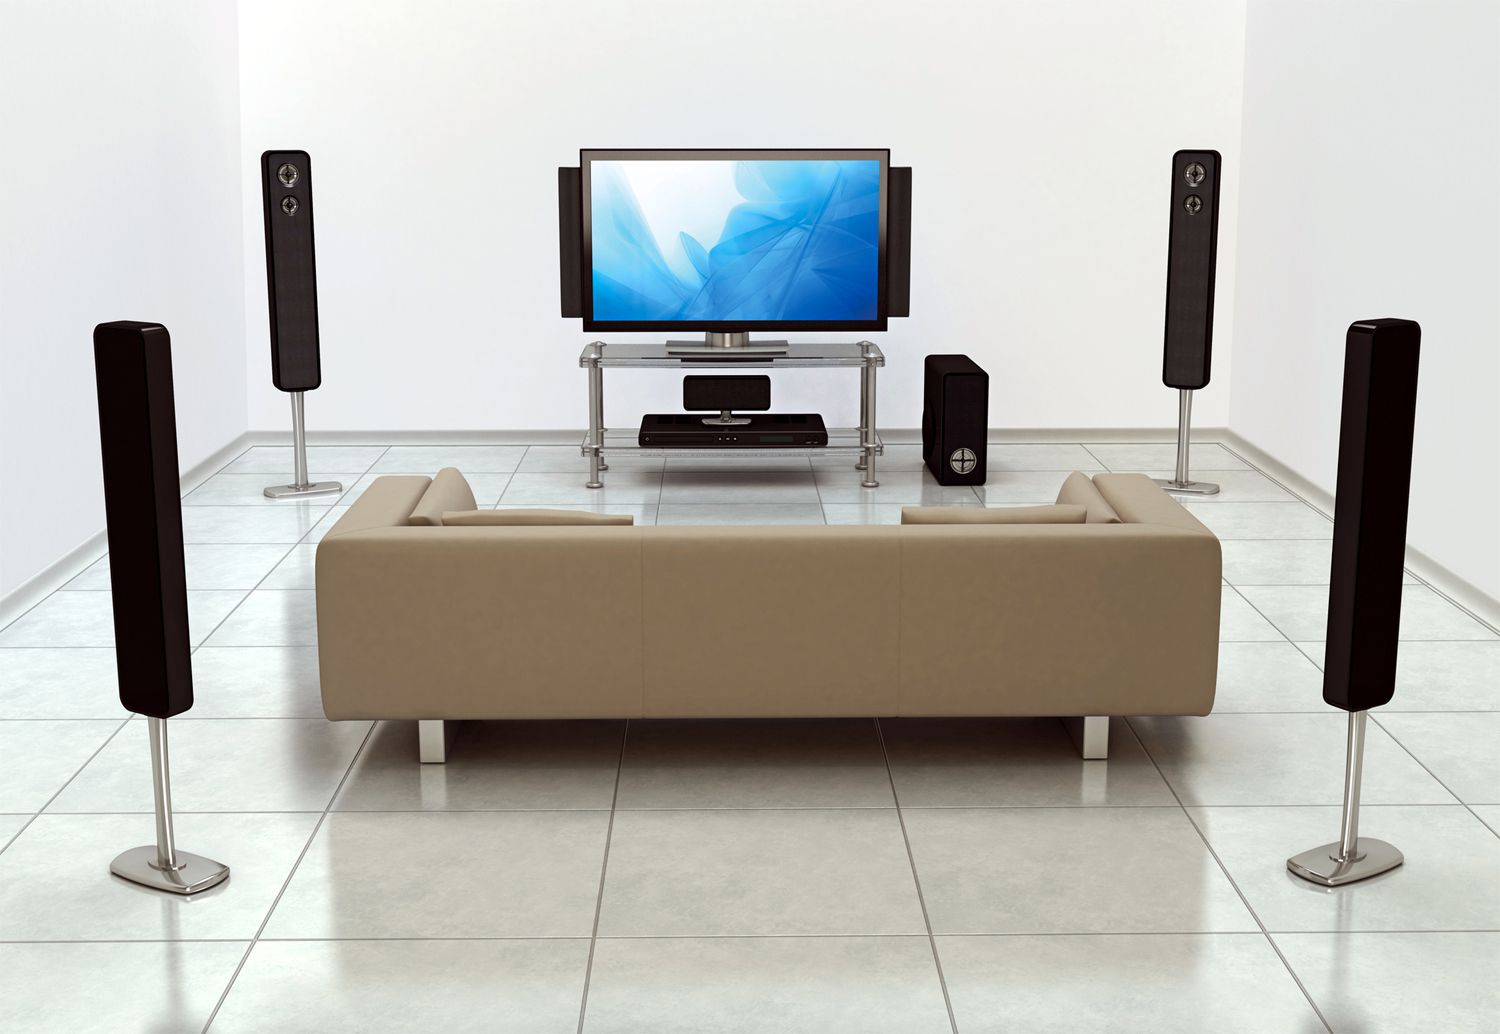 home theatre dolby surround 5.1